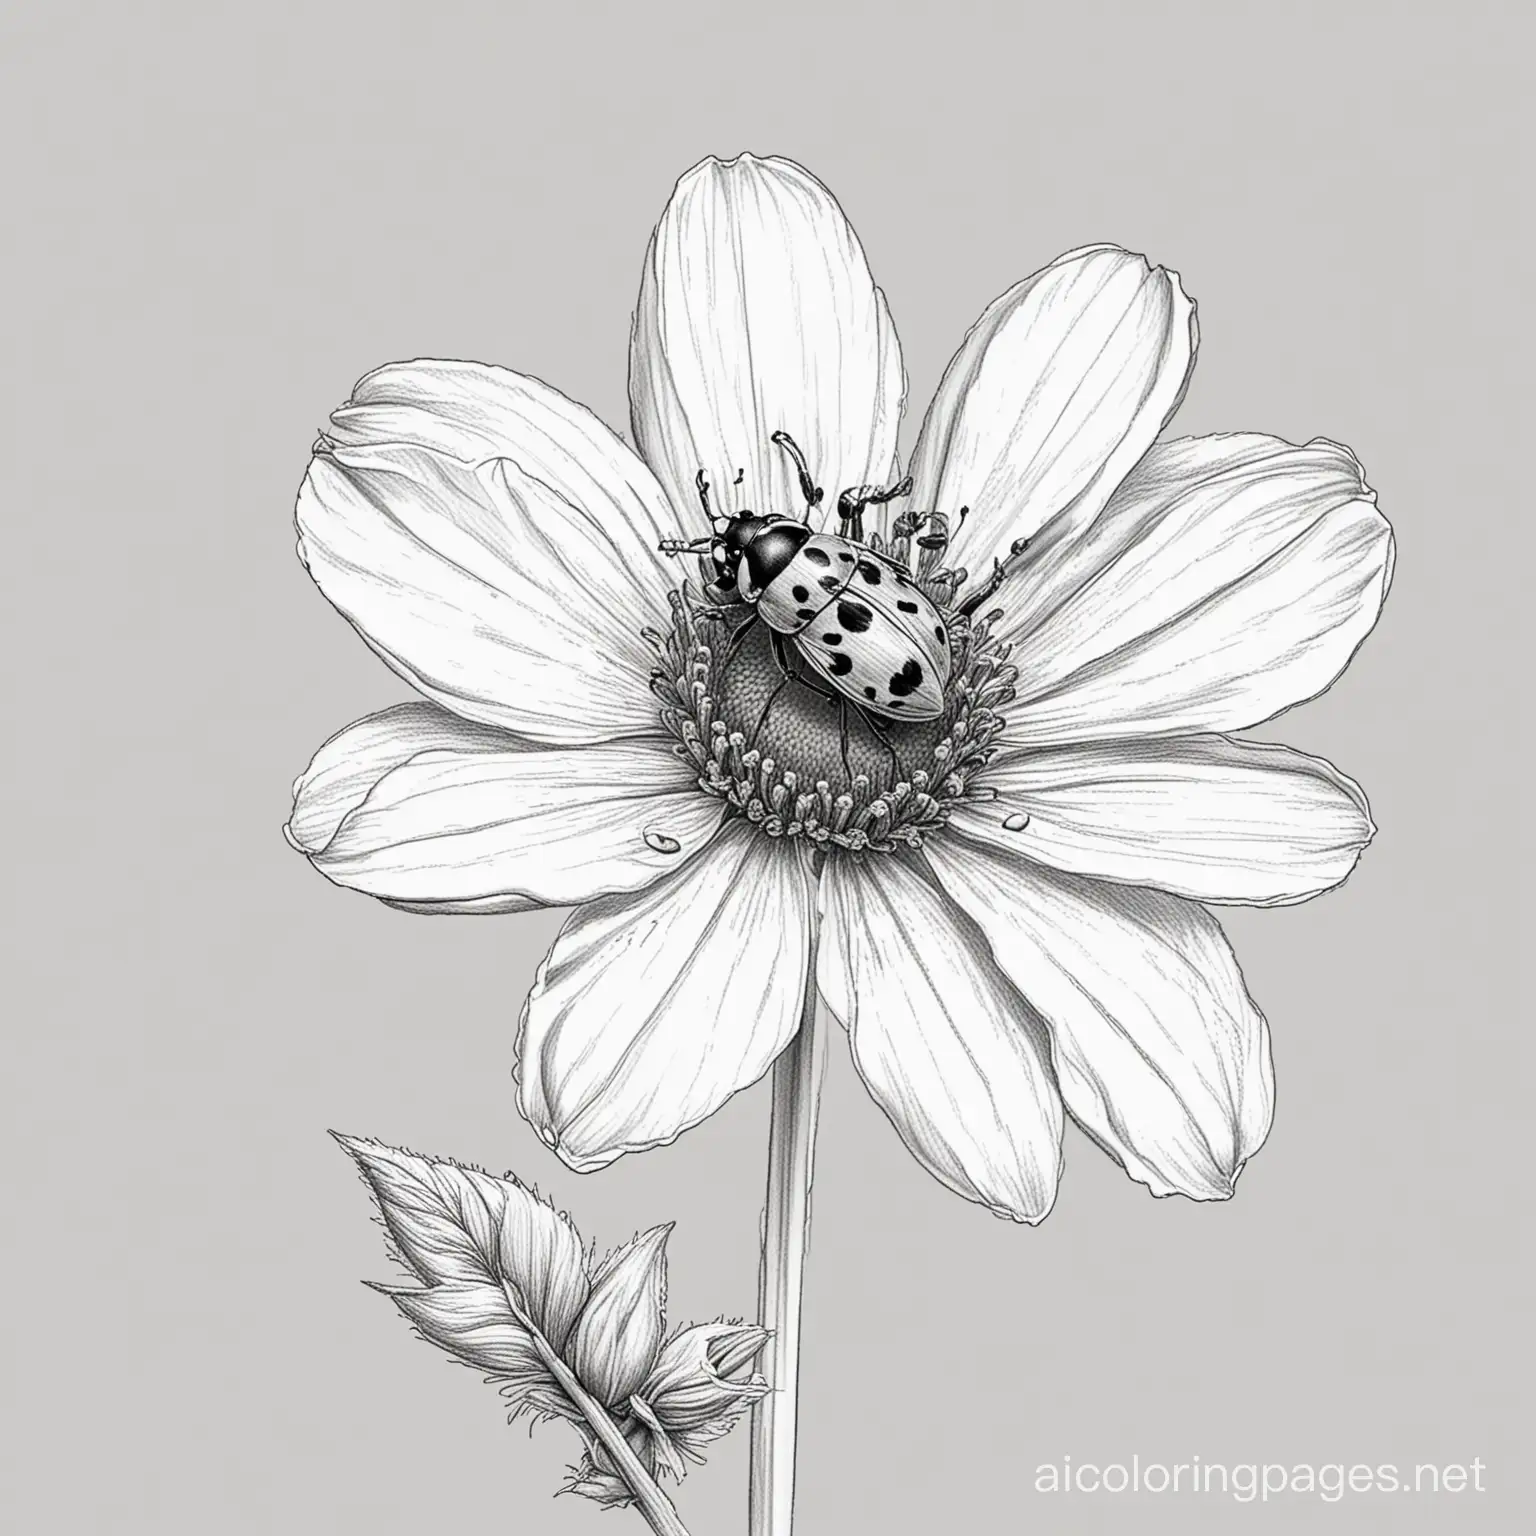 Ladybird on a flower, Coloring Page, black and white, line art, white background, Simplicity, Ample White Space. The background of the coloring page is plain white to make it easy for young children to color within the lines. The outlines of all the subjects are easy to distinguish, making it simple for kids to color without too much difficulty